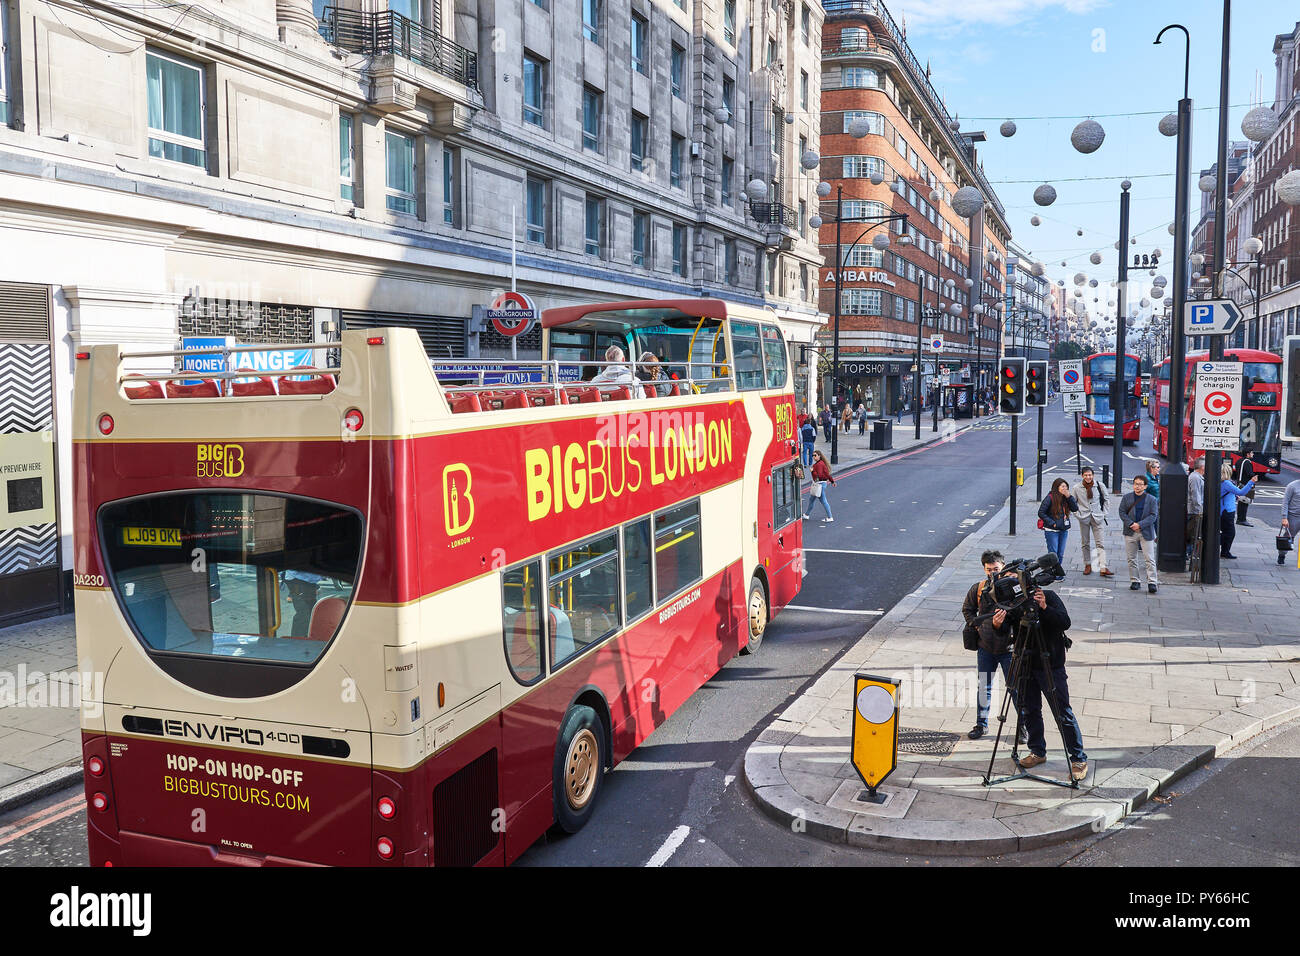 The hop-on hop-of Big Bus double decker bus enters Oxford street in its tour of London, England. Stock Photo